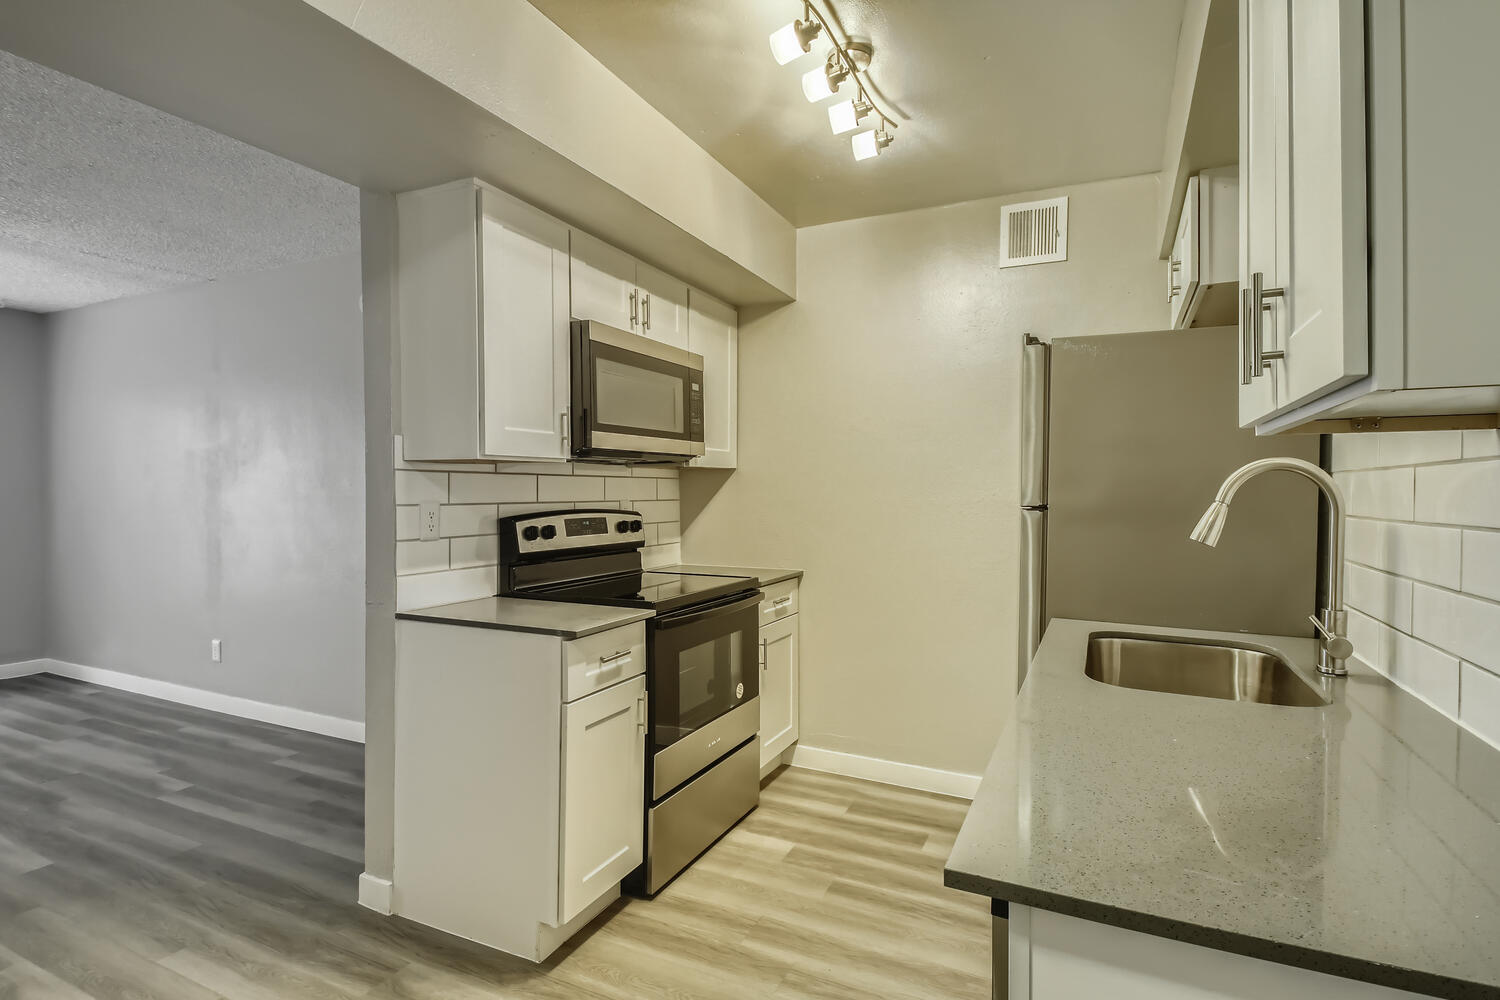 An apartment kitchen with shaker cabinets and a living area nearby at Rise North Ridge.